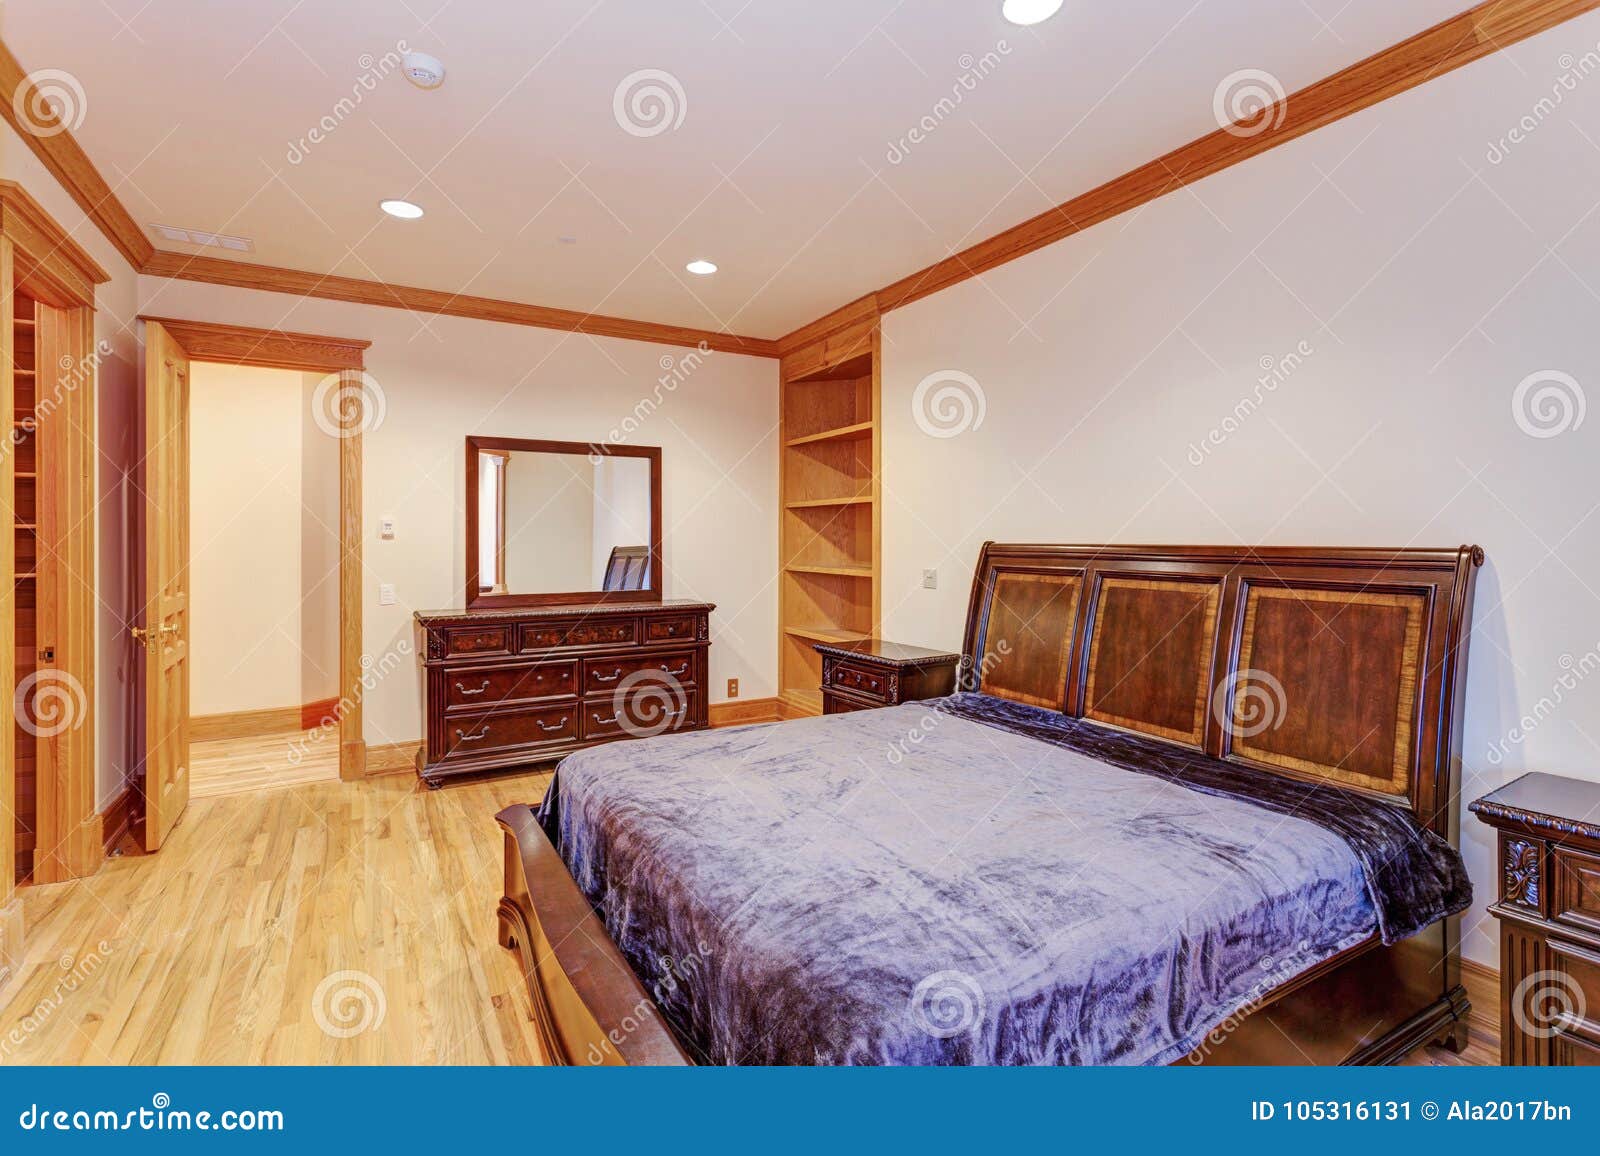 Welcoming Mansion Bedroom With A Light Hardwood Floor Stock Image